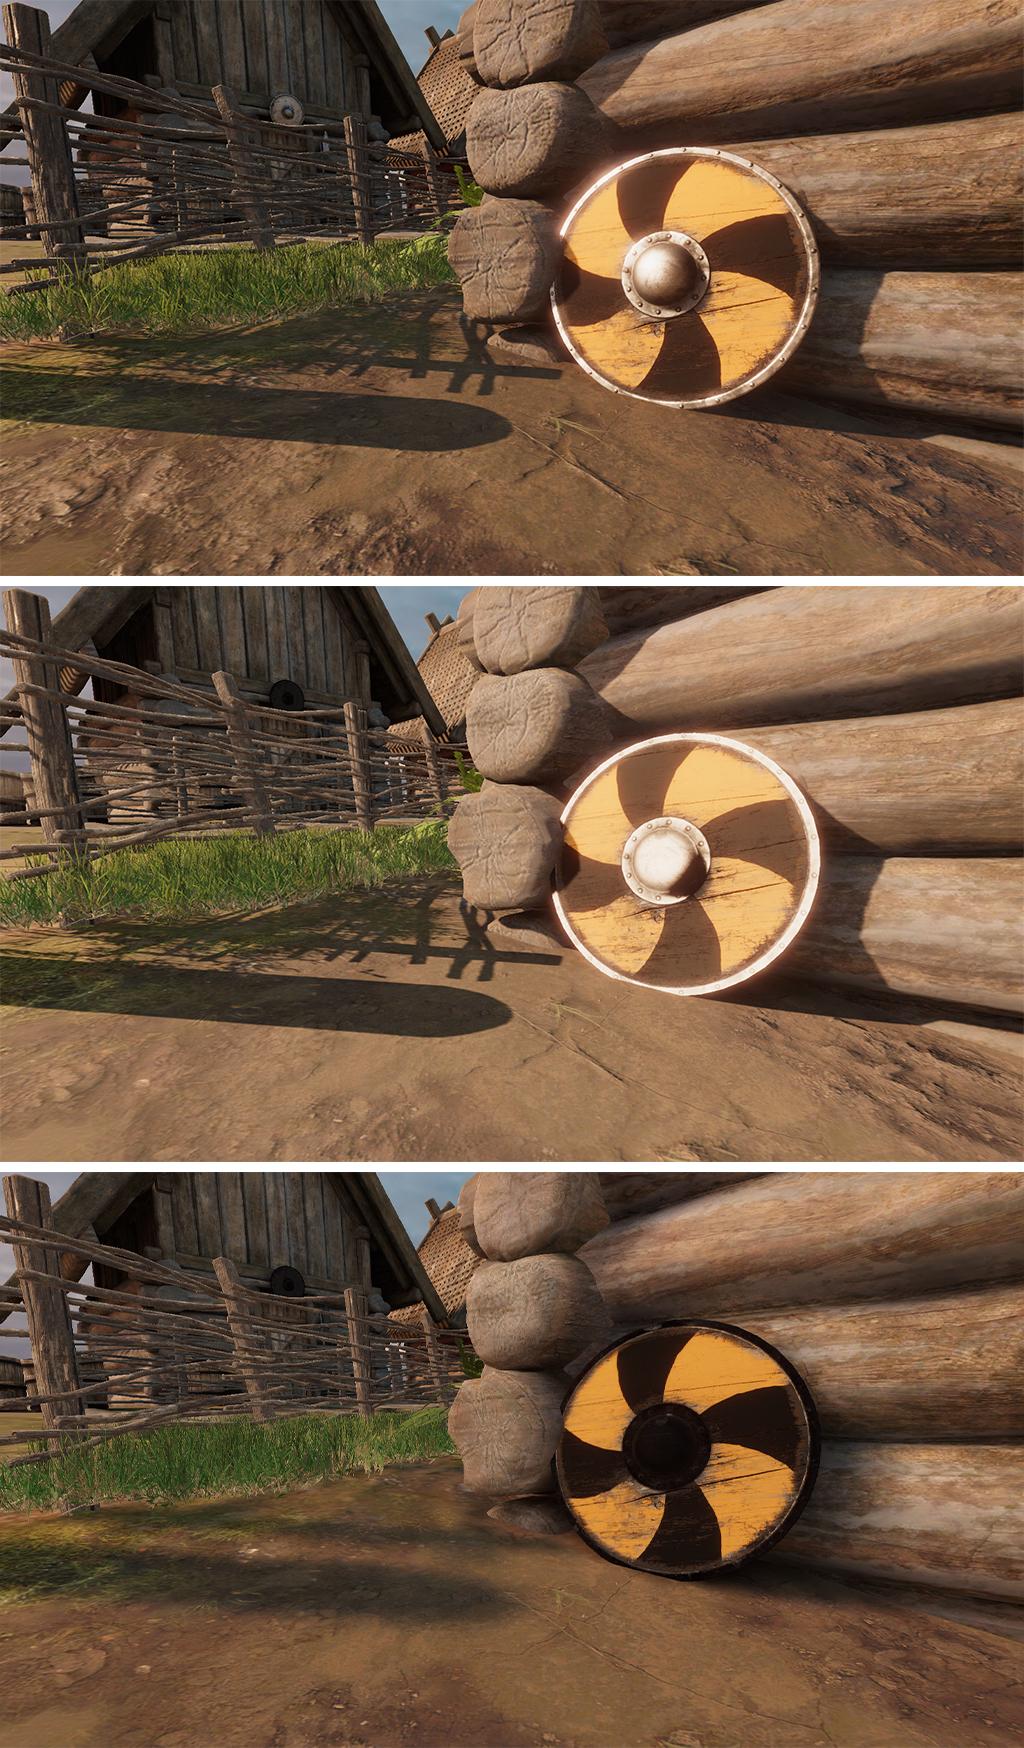 The same scene as Unity renders it with Lit shaders (top), Simple Lit shaders (middle) and Baked Lit shaders (bottom)